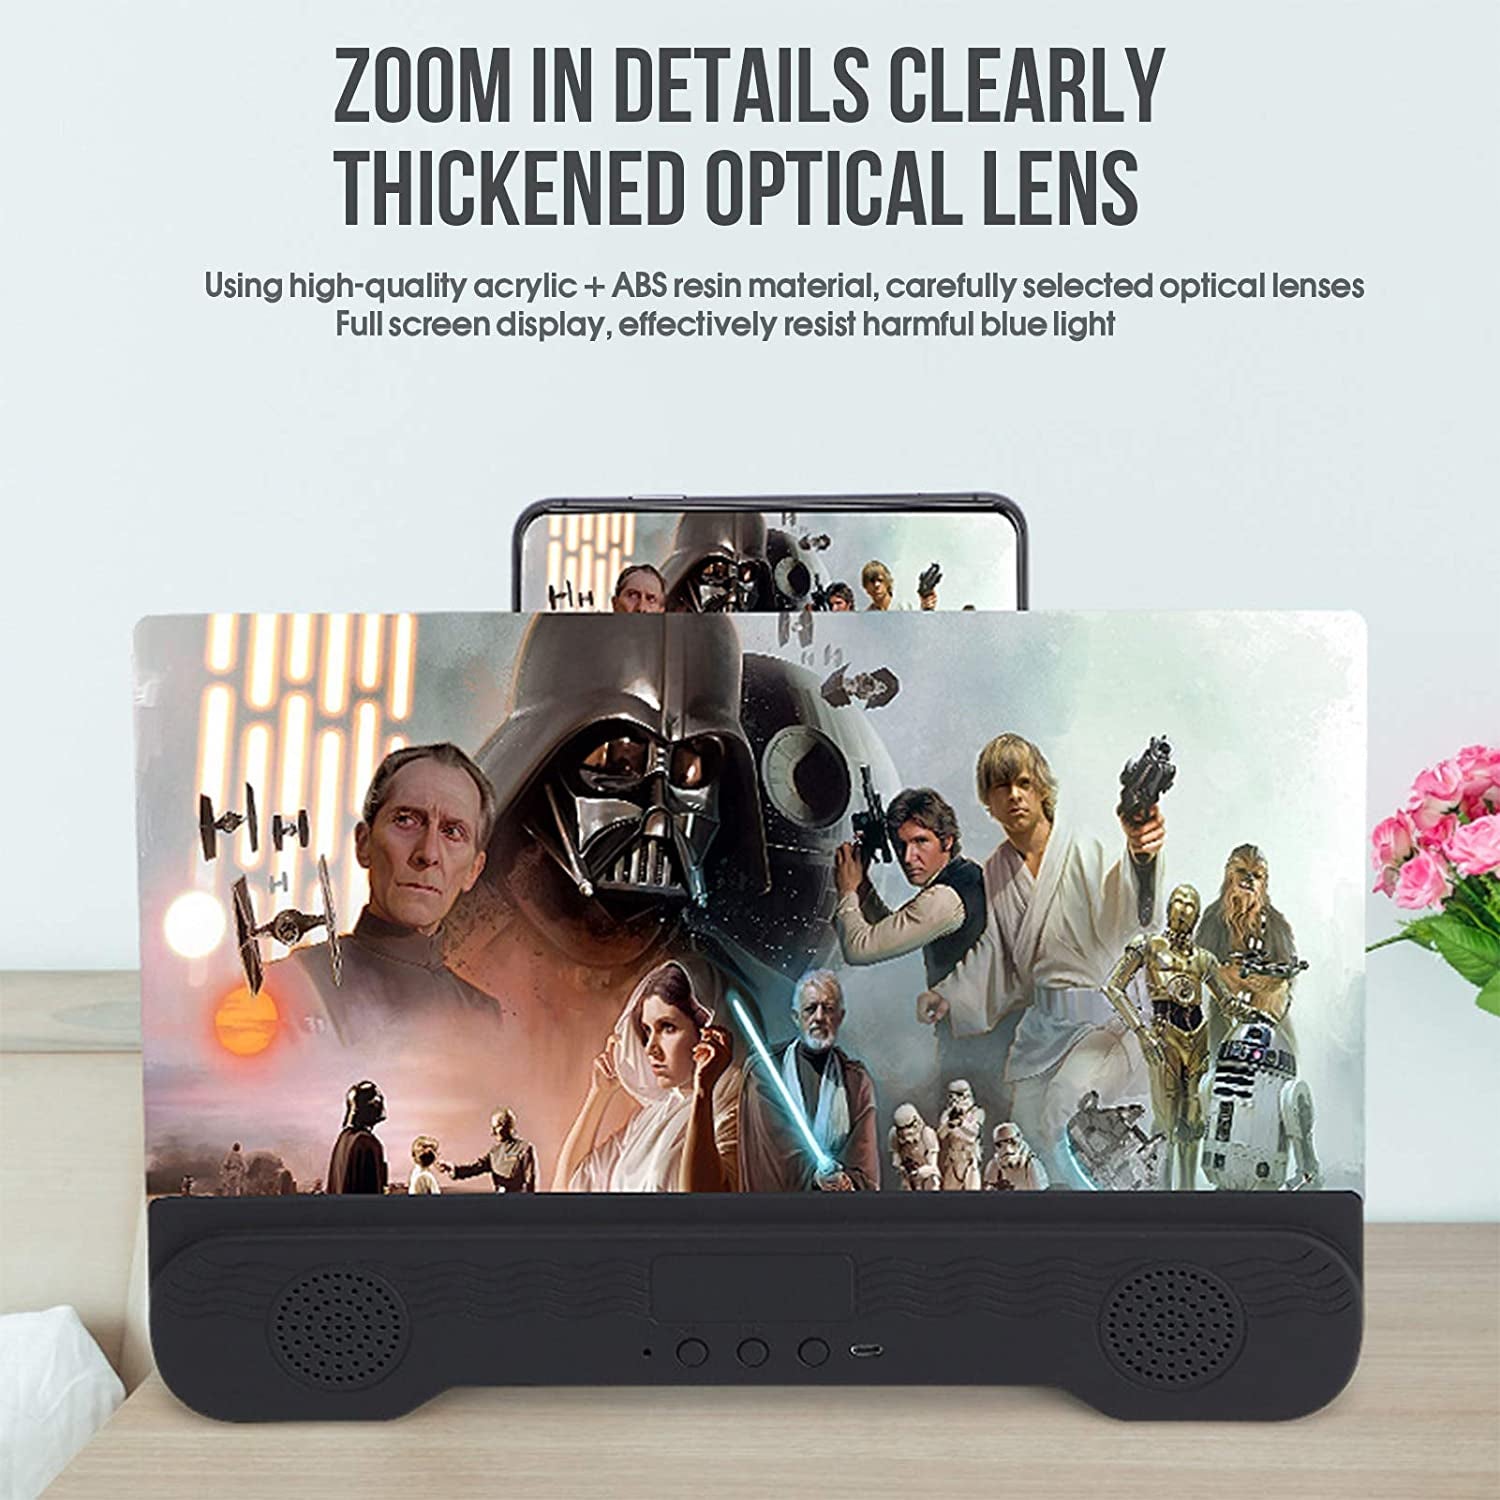 14" Phone Screen Magnifier with Bluetooth Speakers, 6D HD Magnifying Projector Screen Enlarger for Movies, Videos, Games, Adjustable Cell Phone Stand with Screen Amplifier, Supports All Smartphones